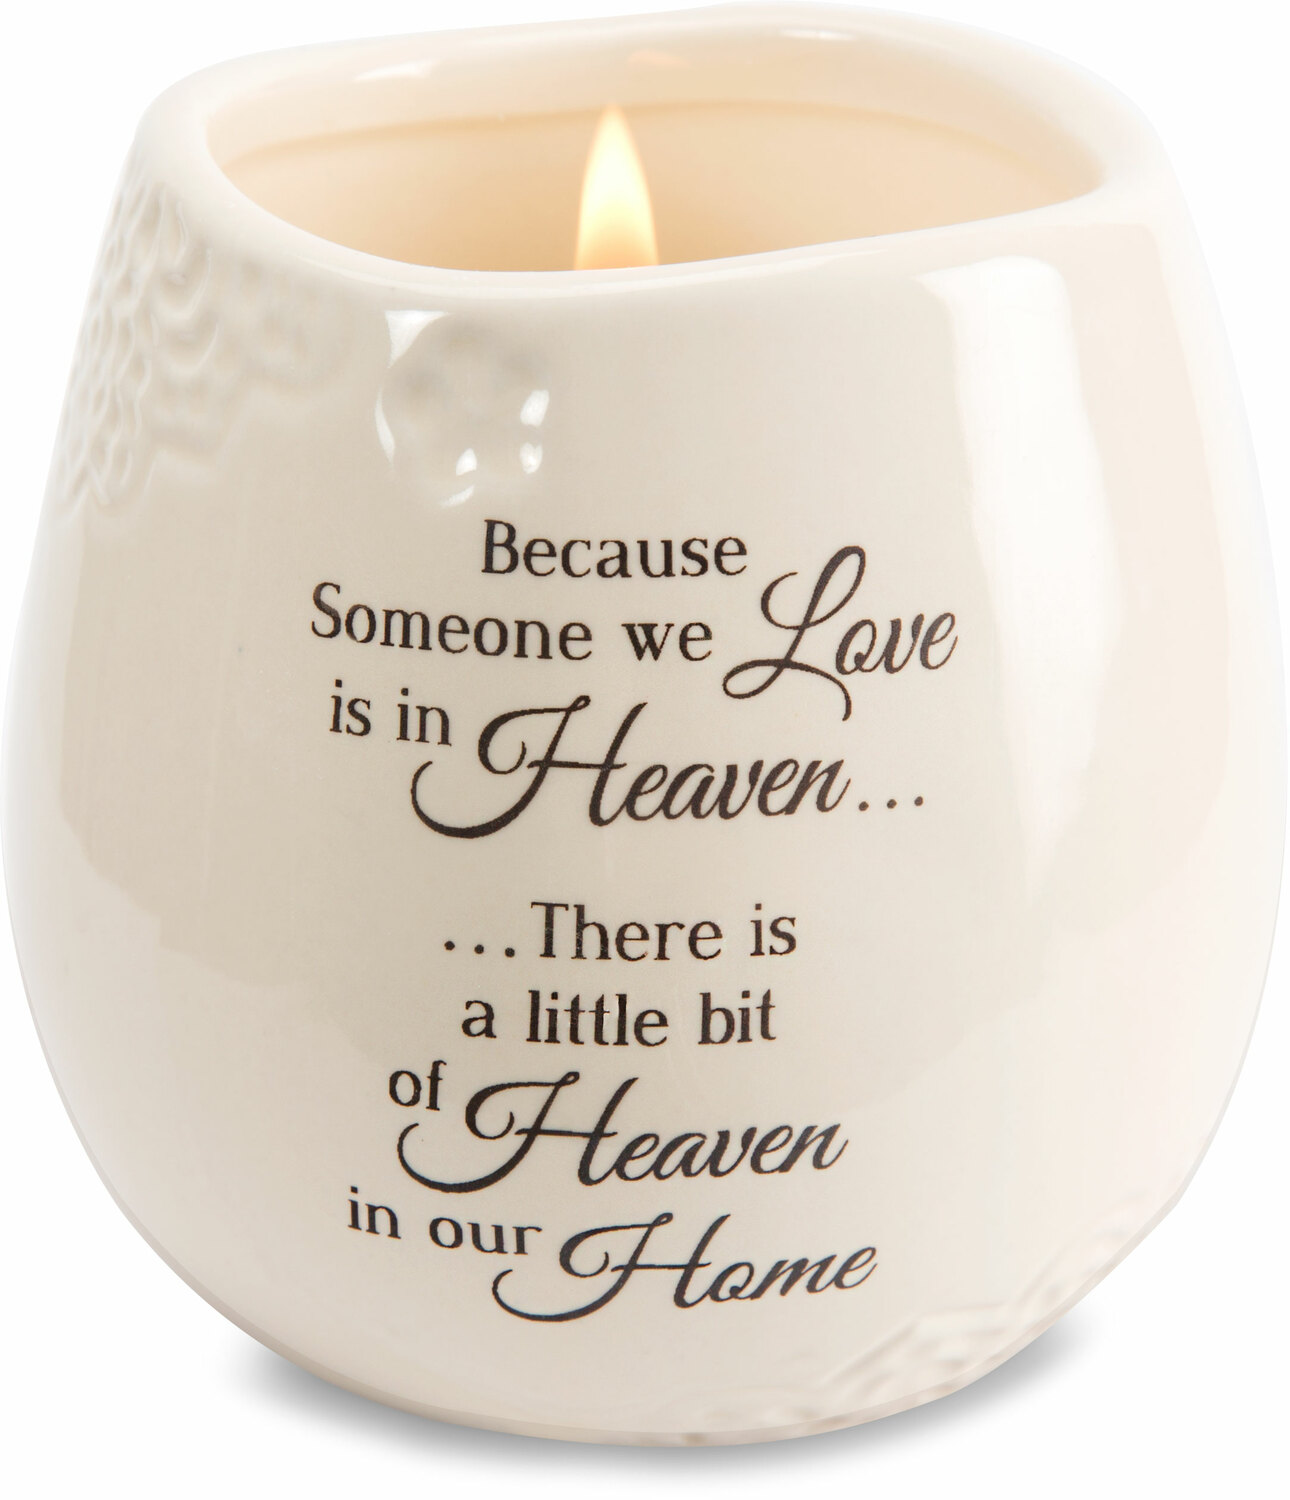 Heaven In Our Home by Light Your Way Memorial - Heaven In Our Home - 8 oz - 100% Soy Wax Candle
Scent: Tranquility